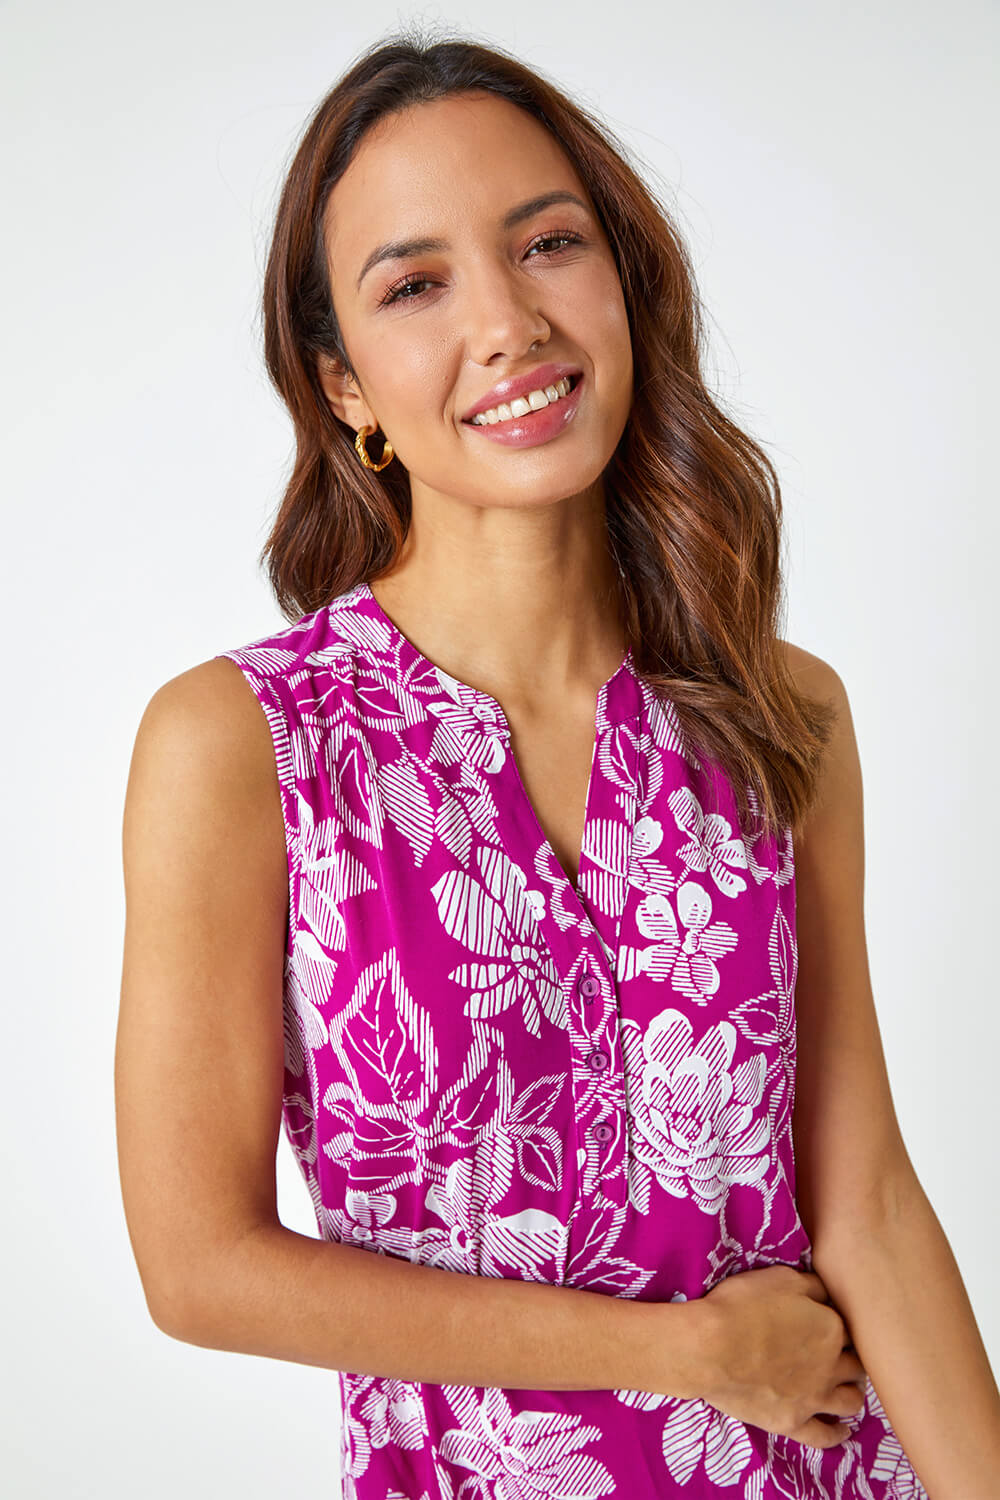 MAGENTA Textured Floral Print Sleeveless Top, Image 4 of 5